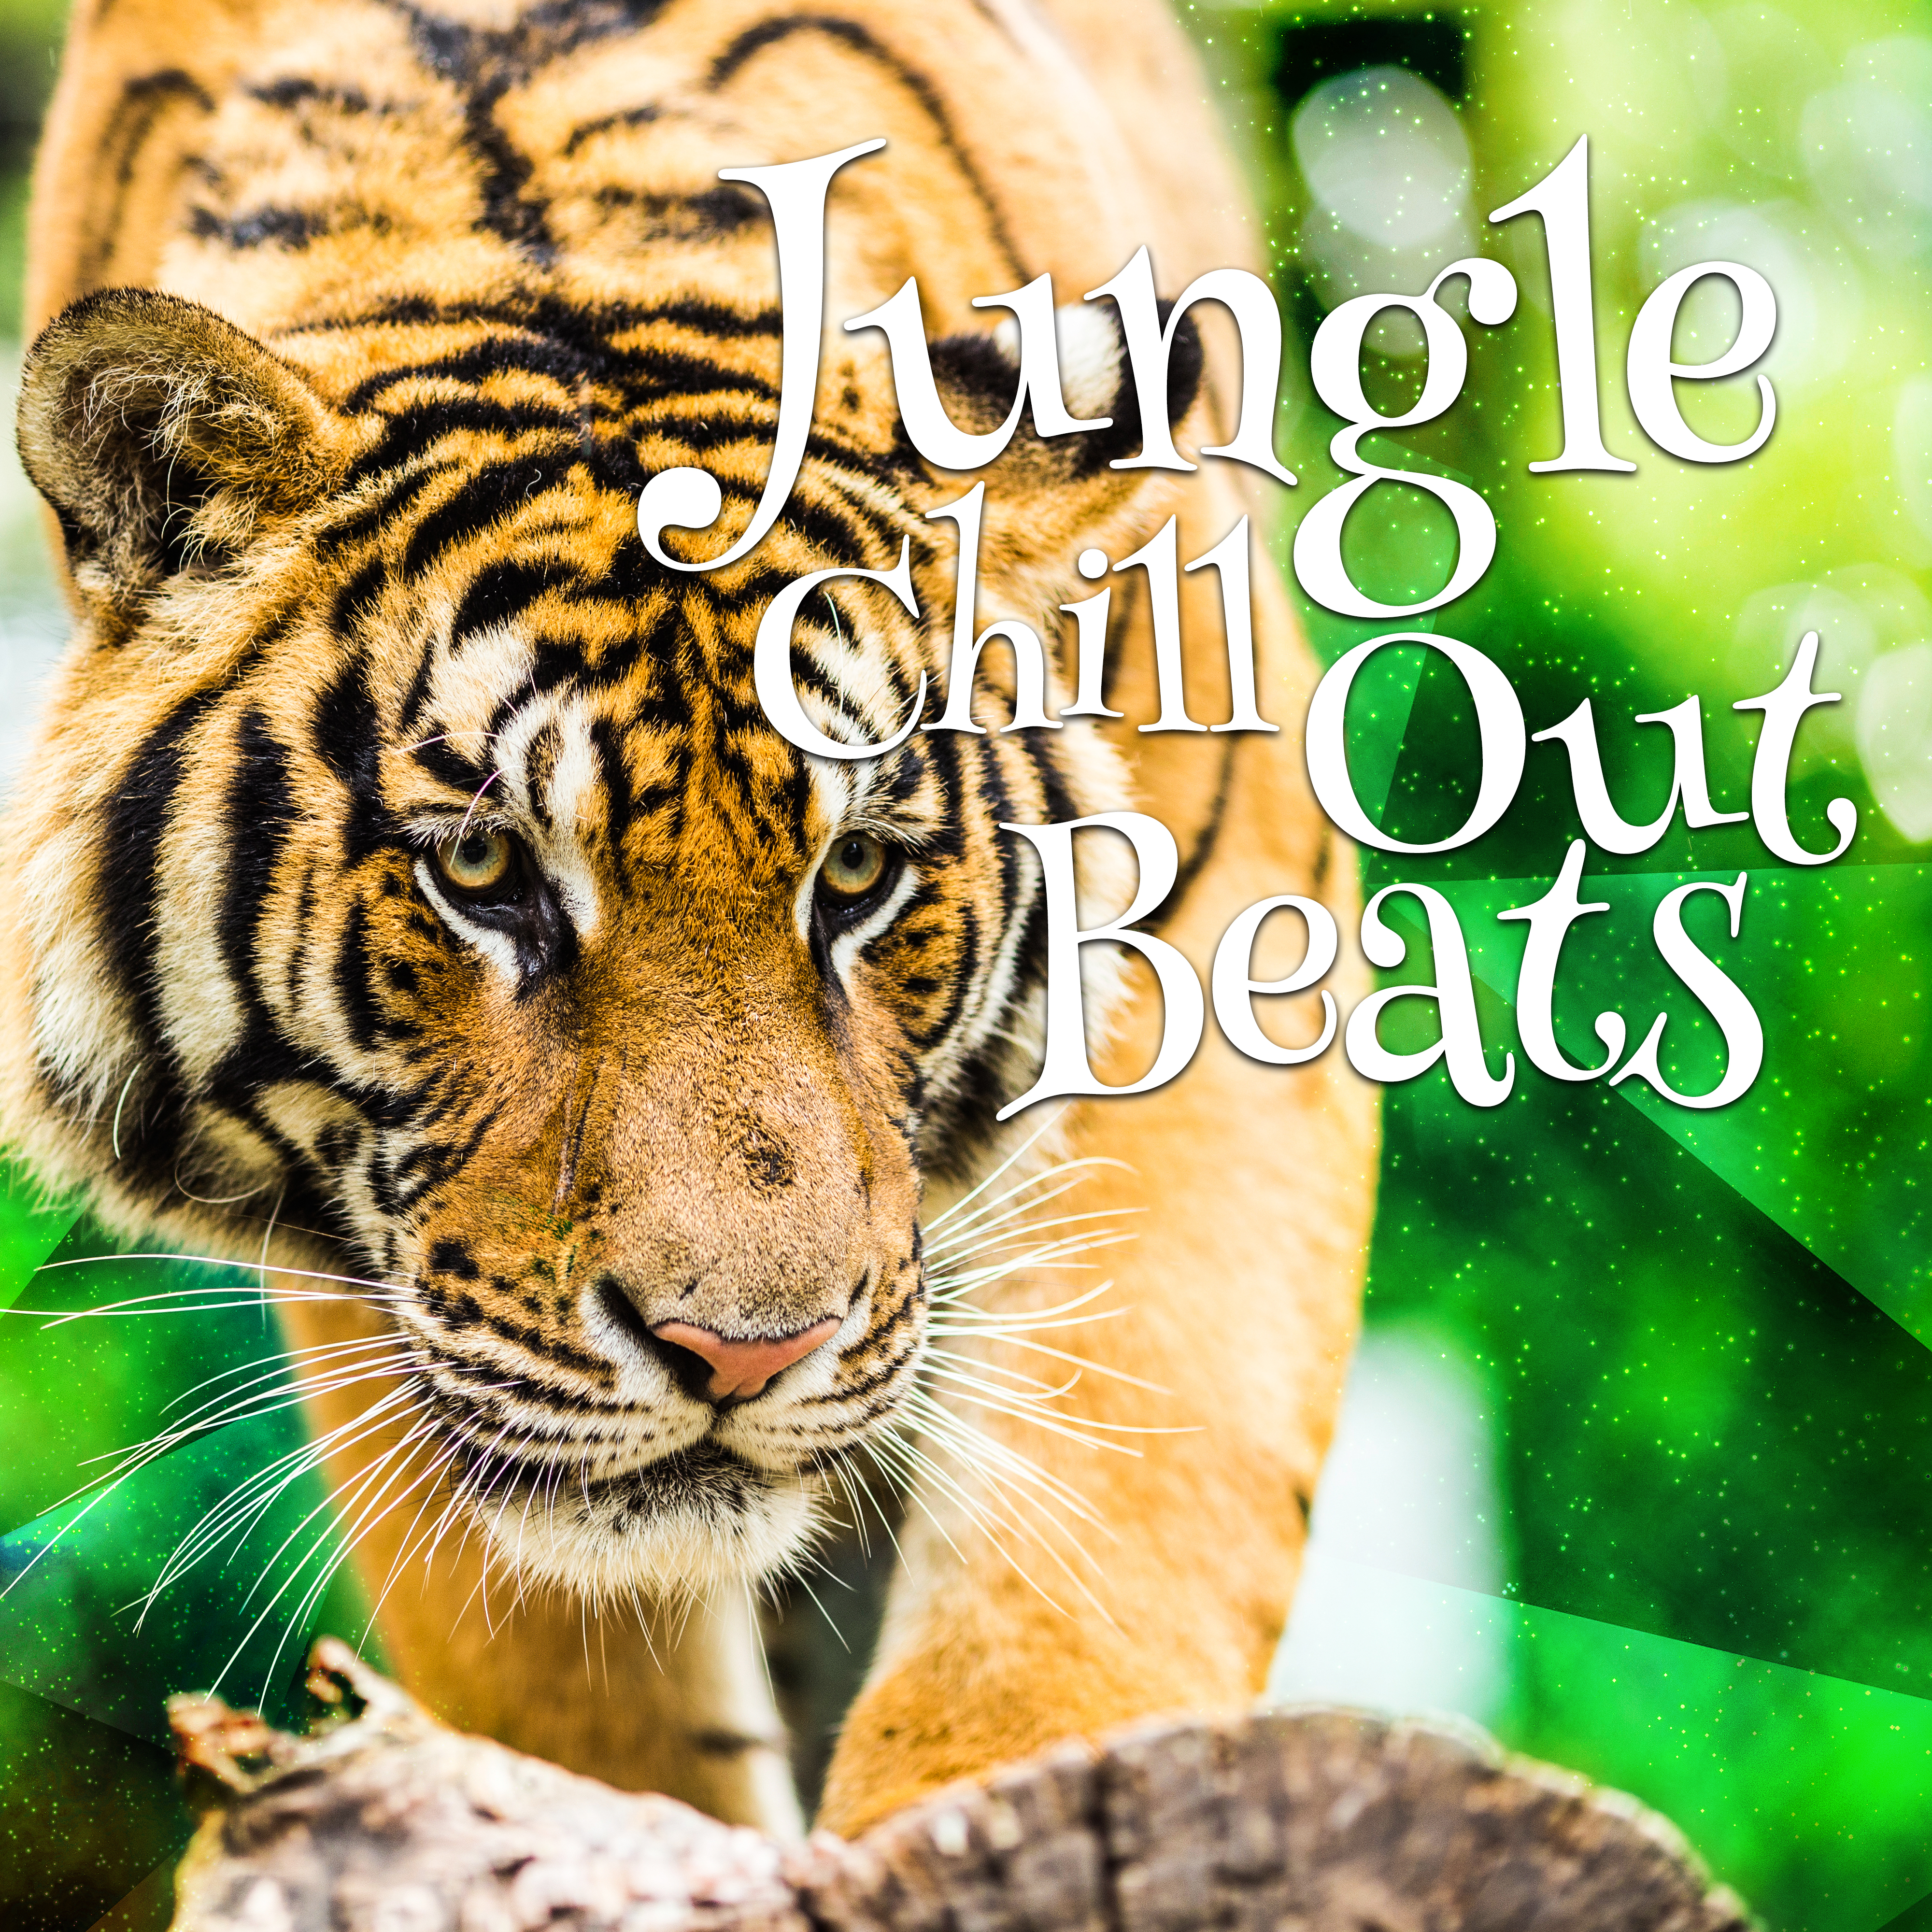 Jungle Chill Out Beats  Summer Melodies, Chill Out Beats, Calm Down  Relax, Peaceful Mind